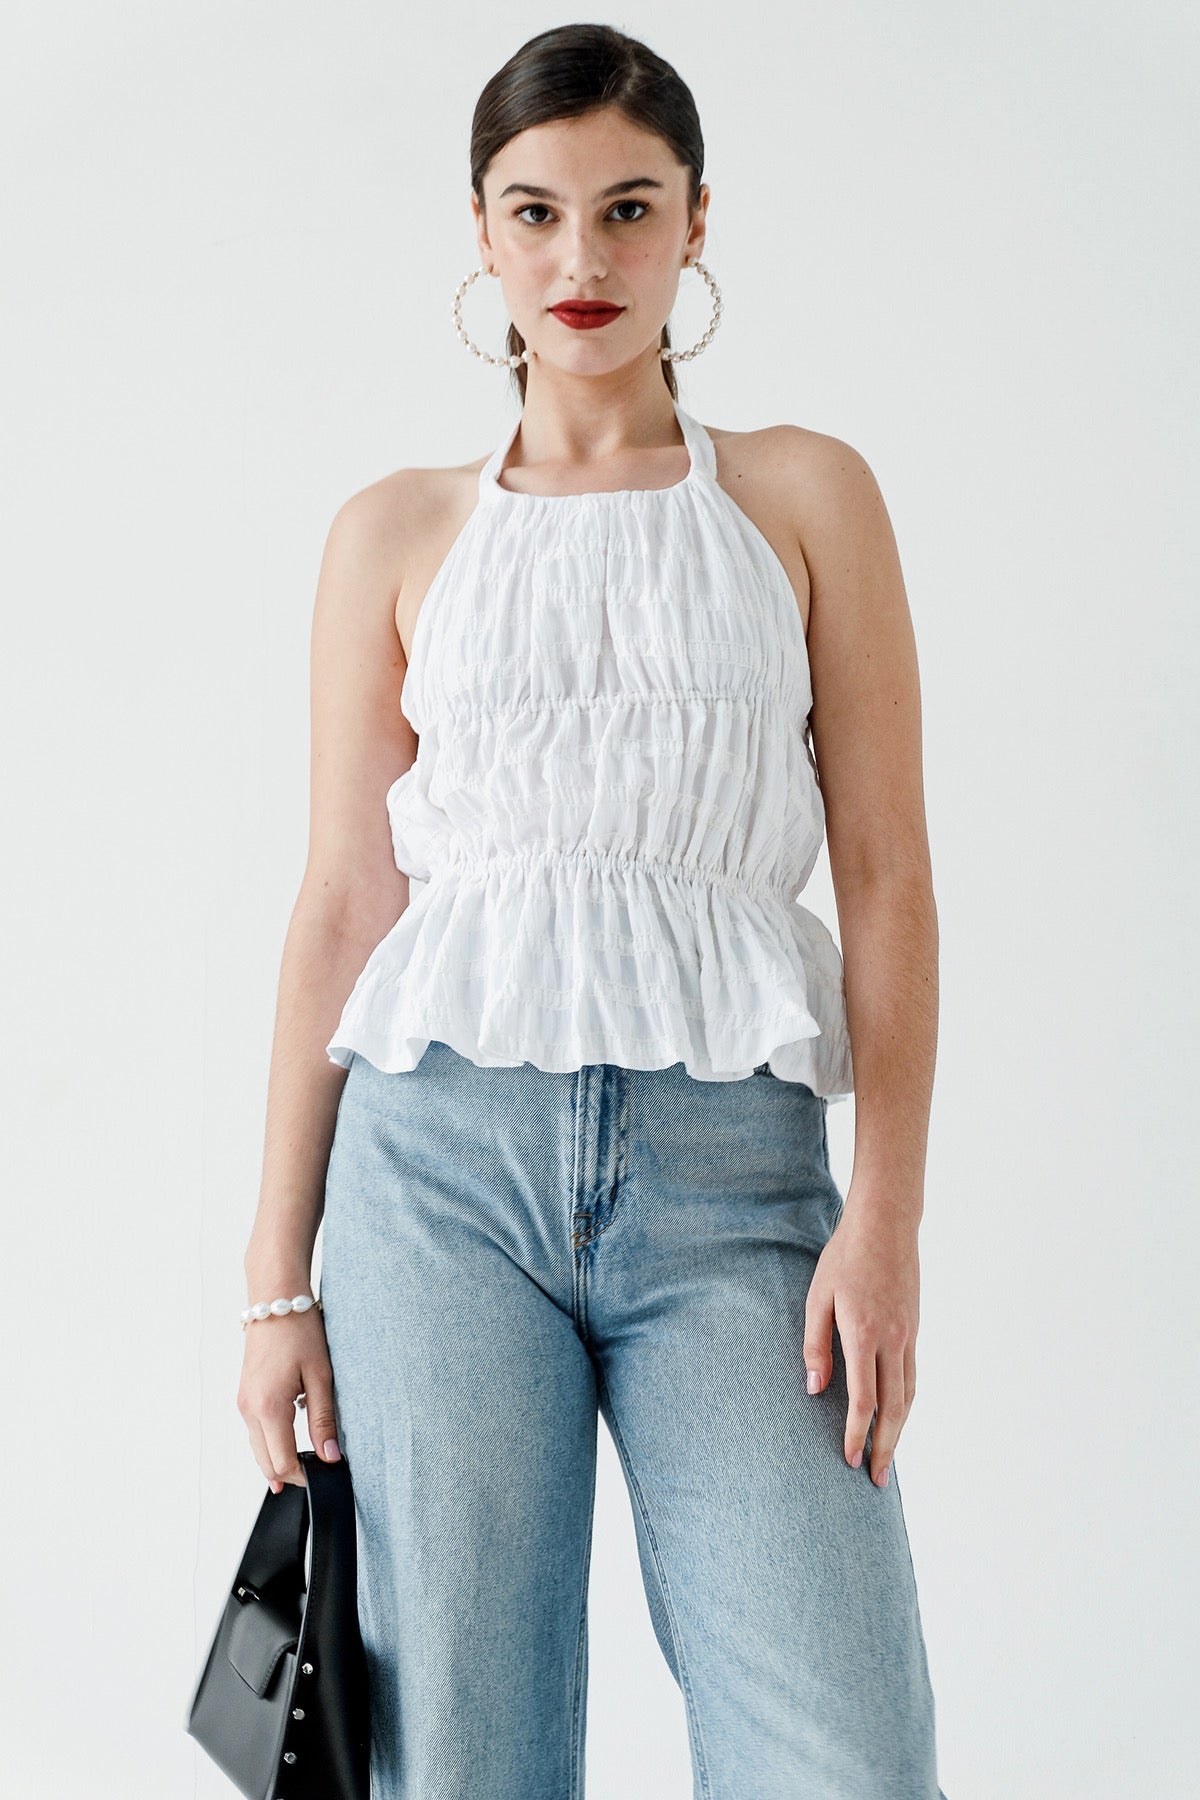 Aceso Top in White